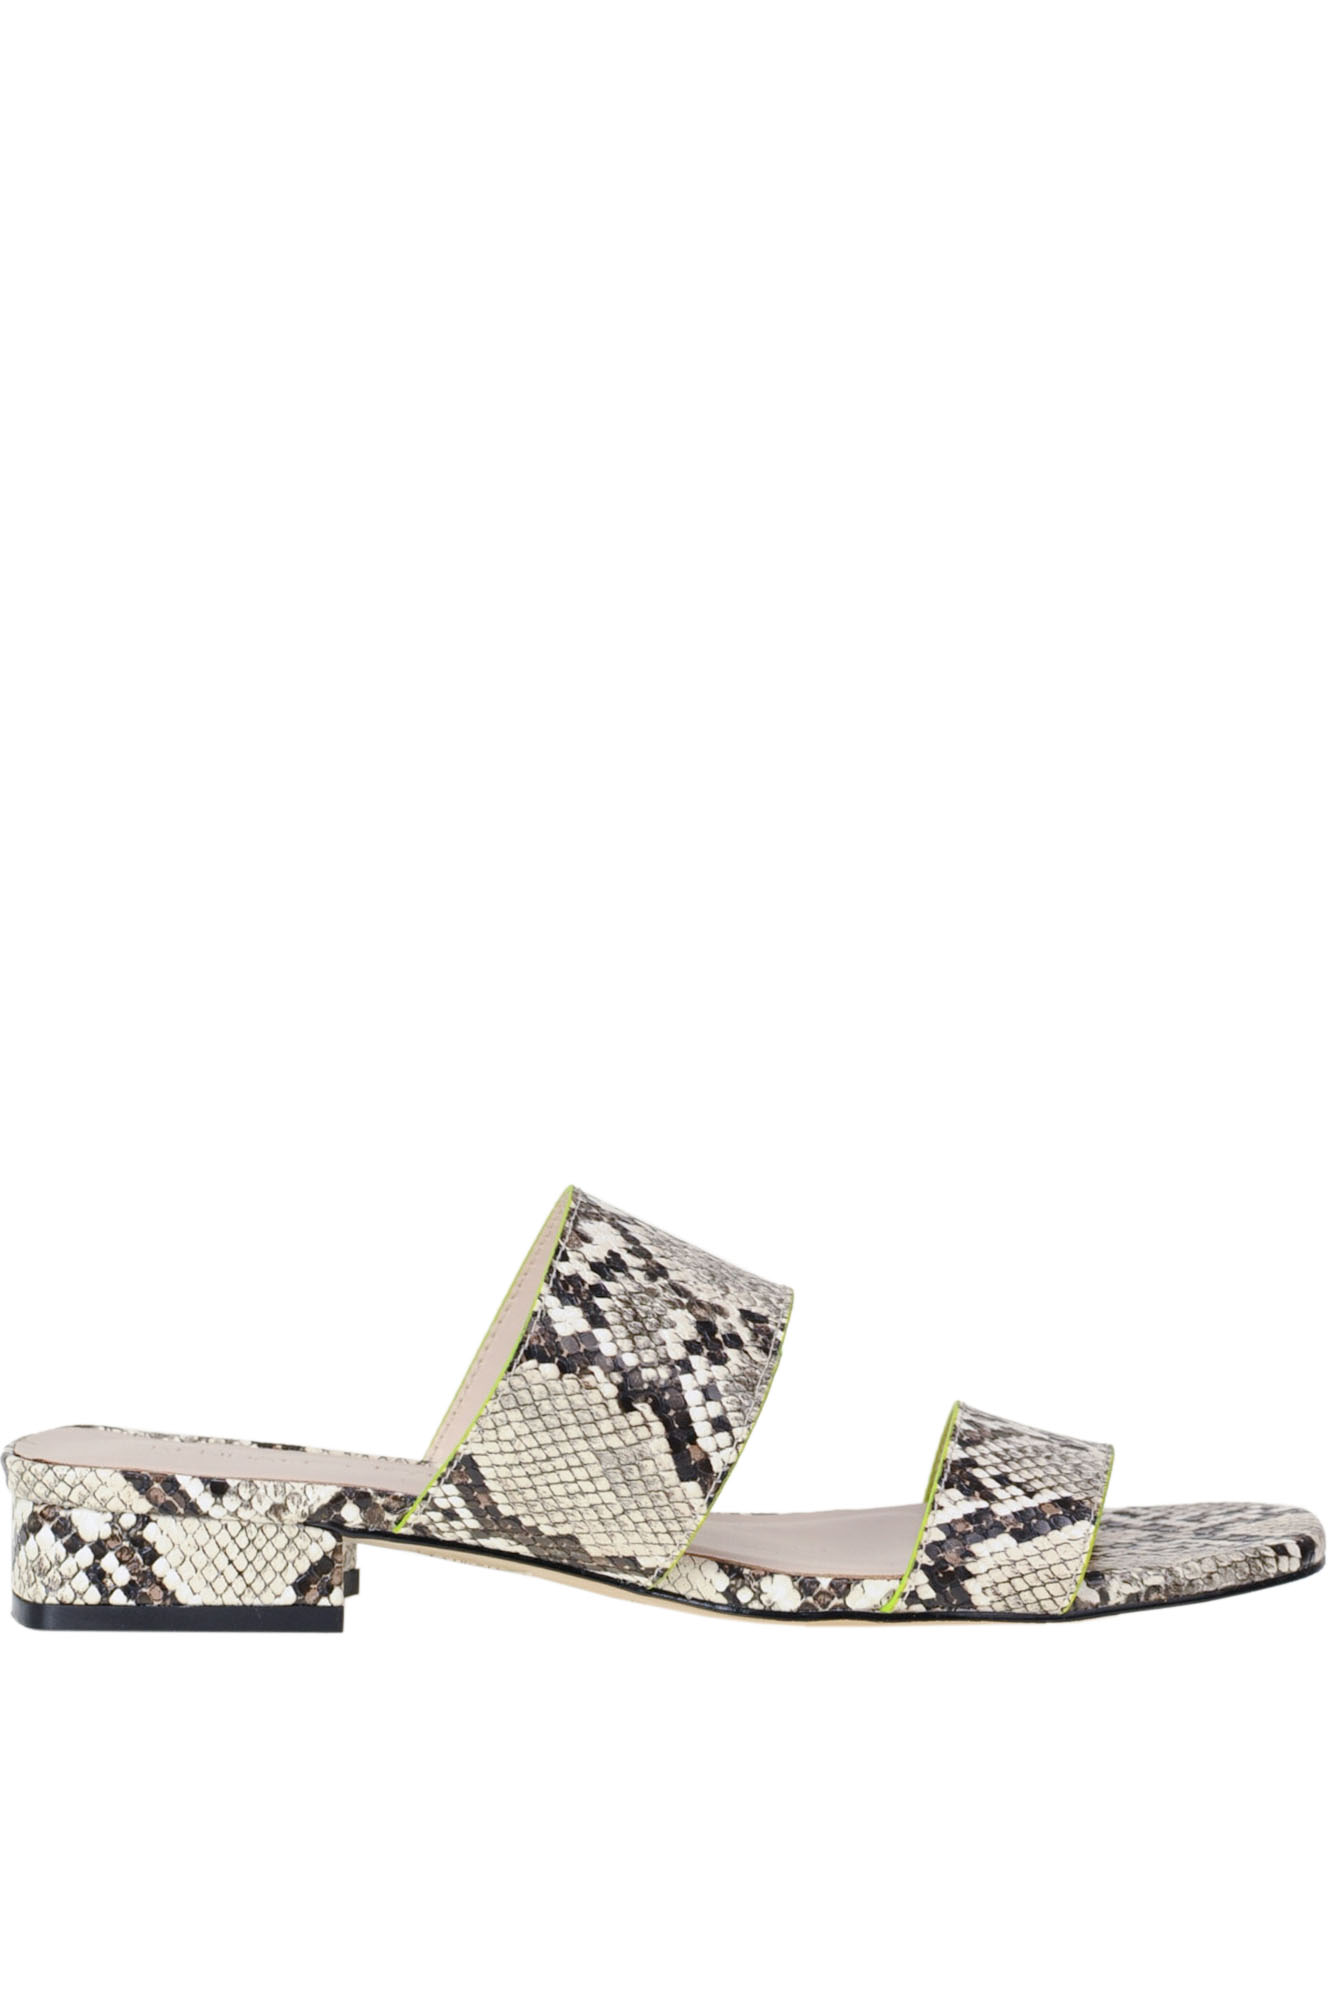 KENDALL + KYLIE REPTILE PRINT ECO-LEATHER MULES